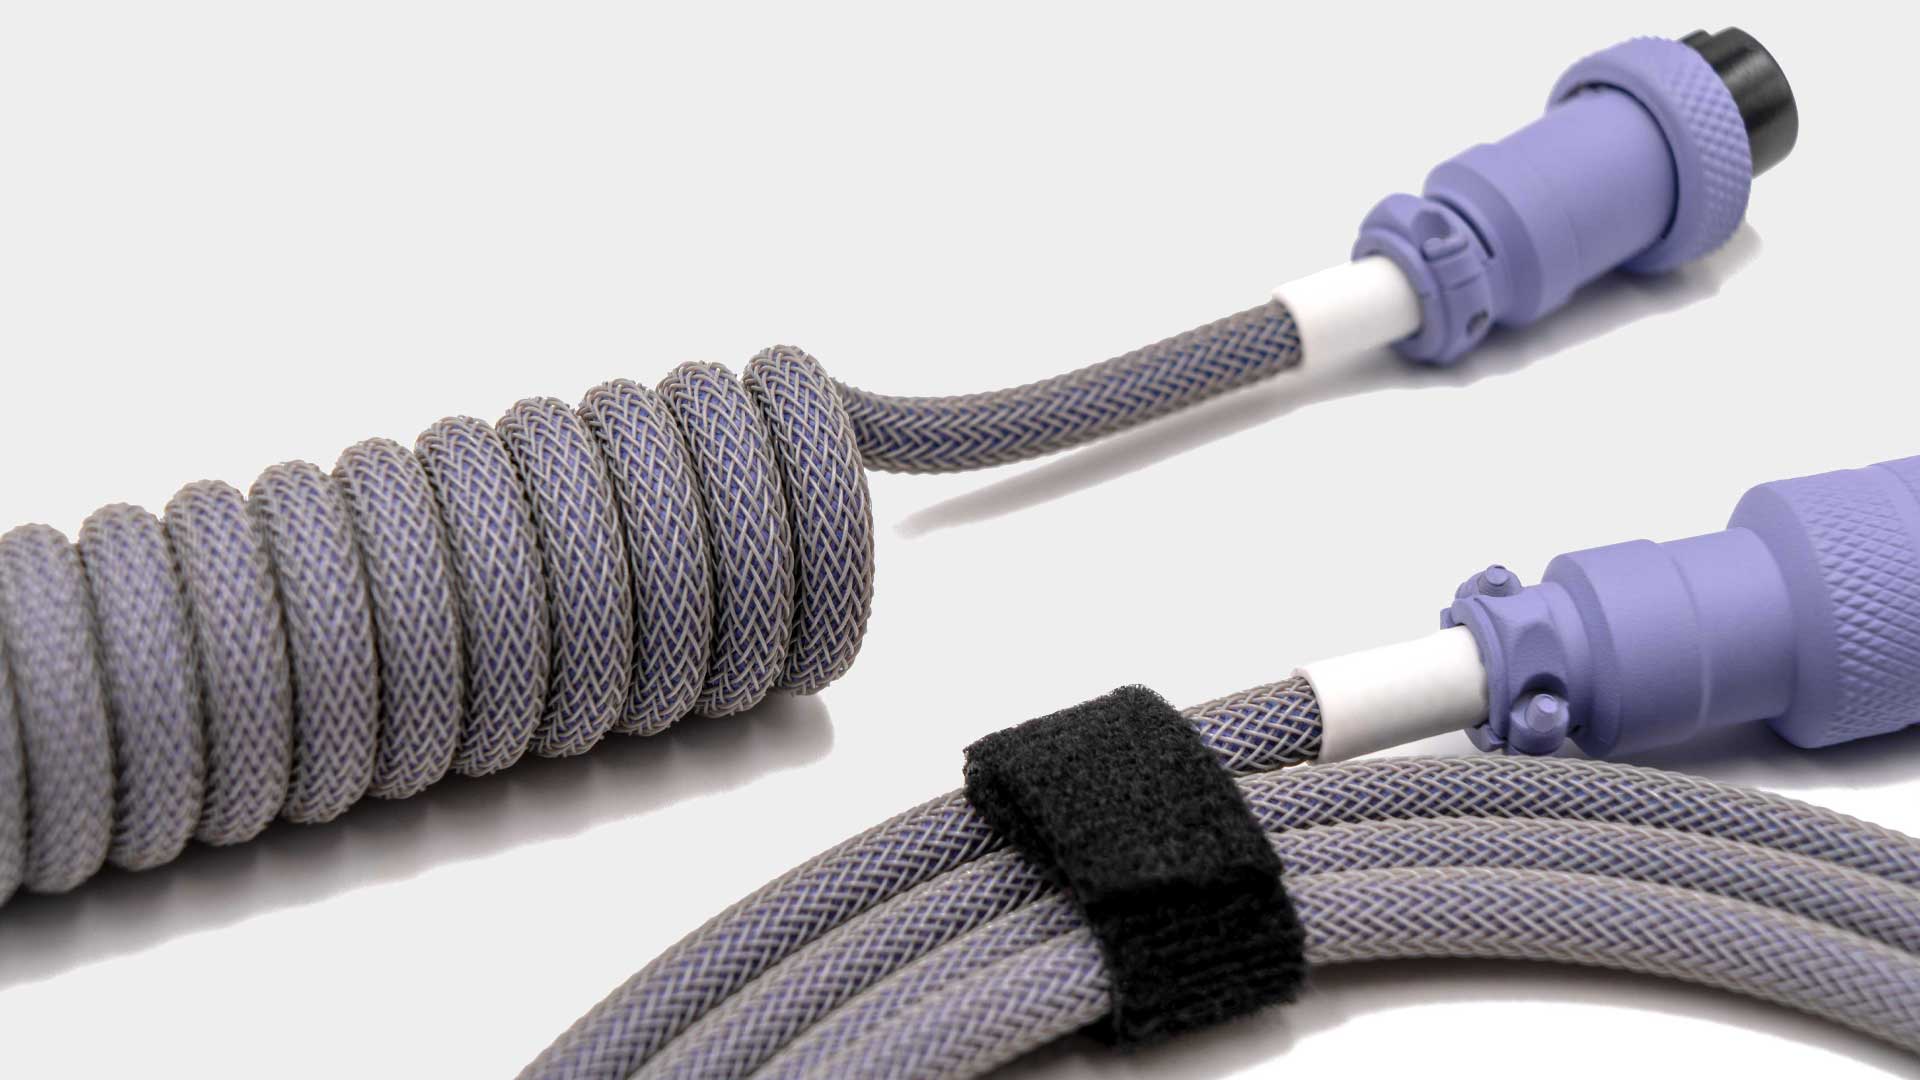 Blurple Cable-Space Cables-coiled keyboard cable-coiled usb c cable-coiled cable keyboard